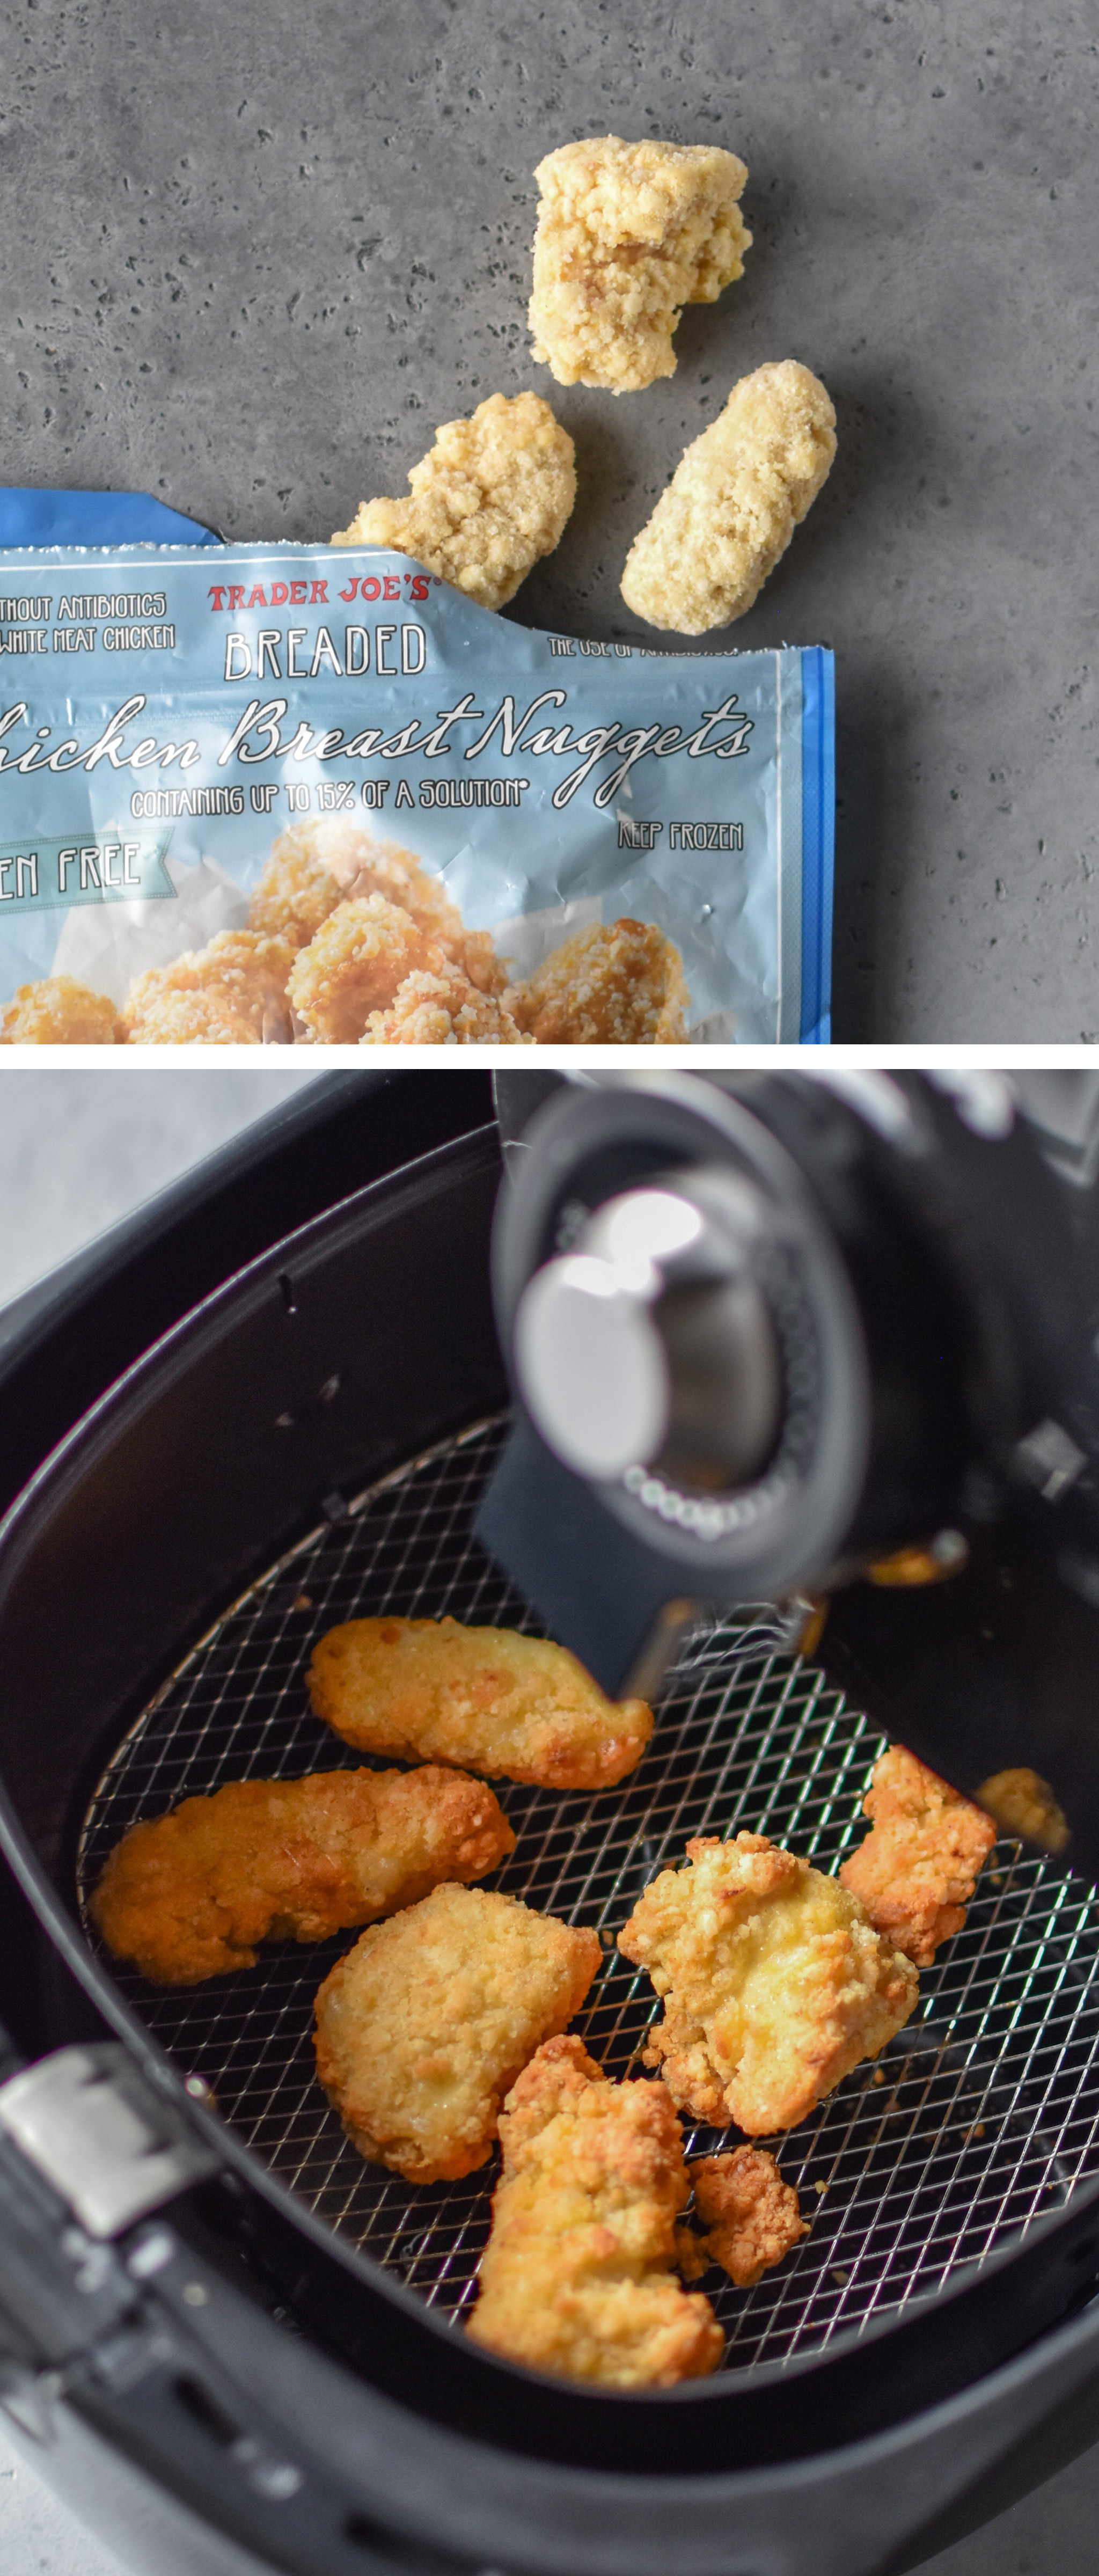 chicken nuggets from trader joe's made in the air fryer